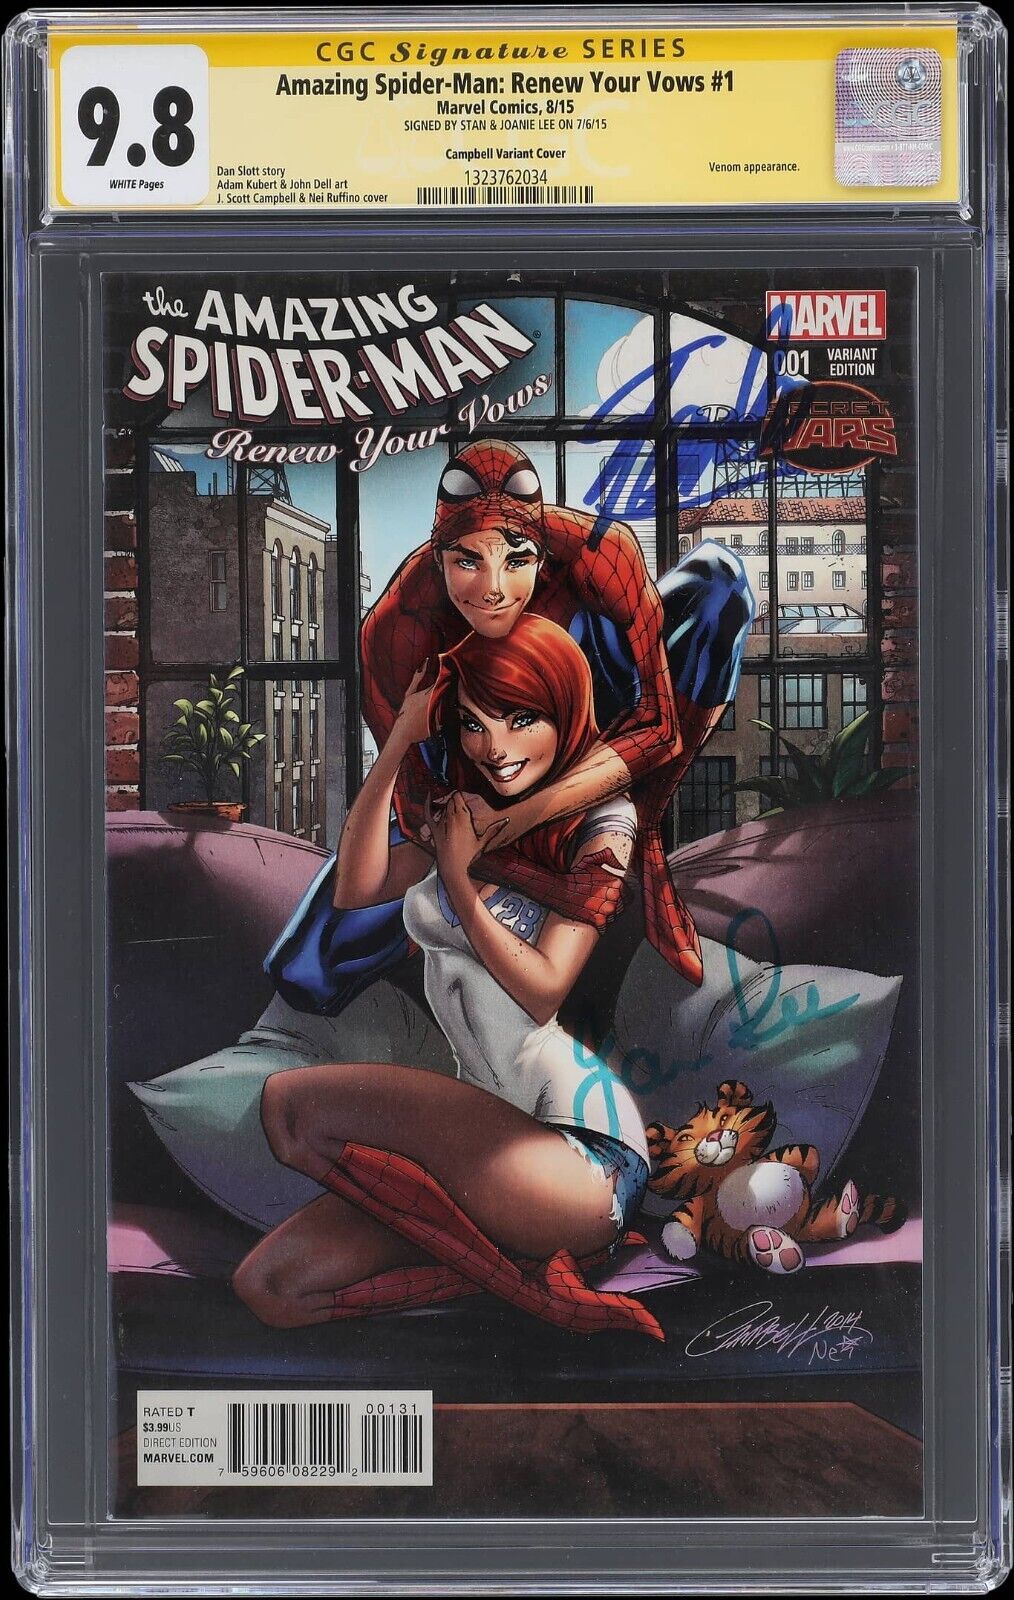 Renew Your Vows #1 (J. Scott Campbell) CGC 9.8 Signed By Stan Lee and Joanie Lee